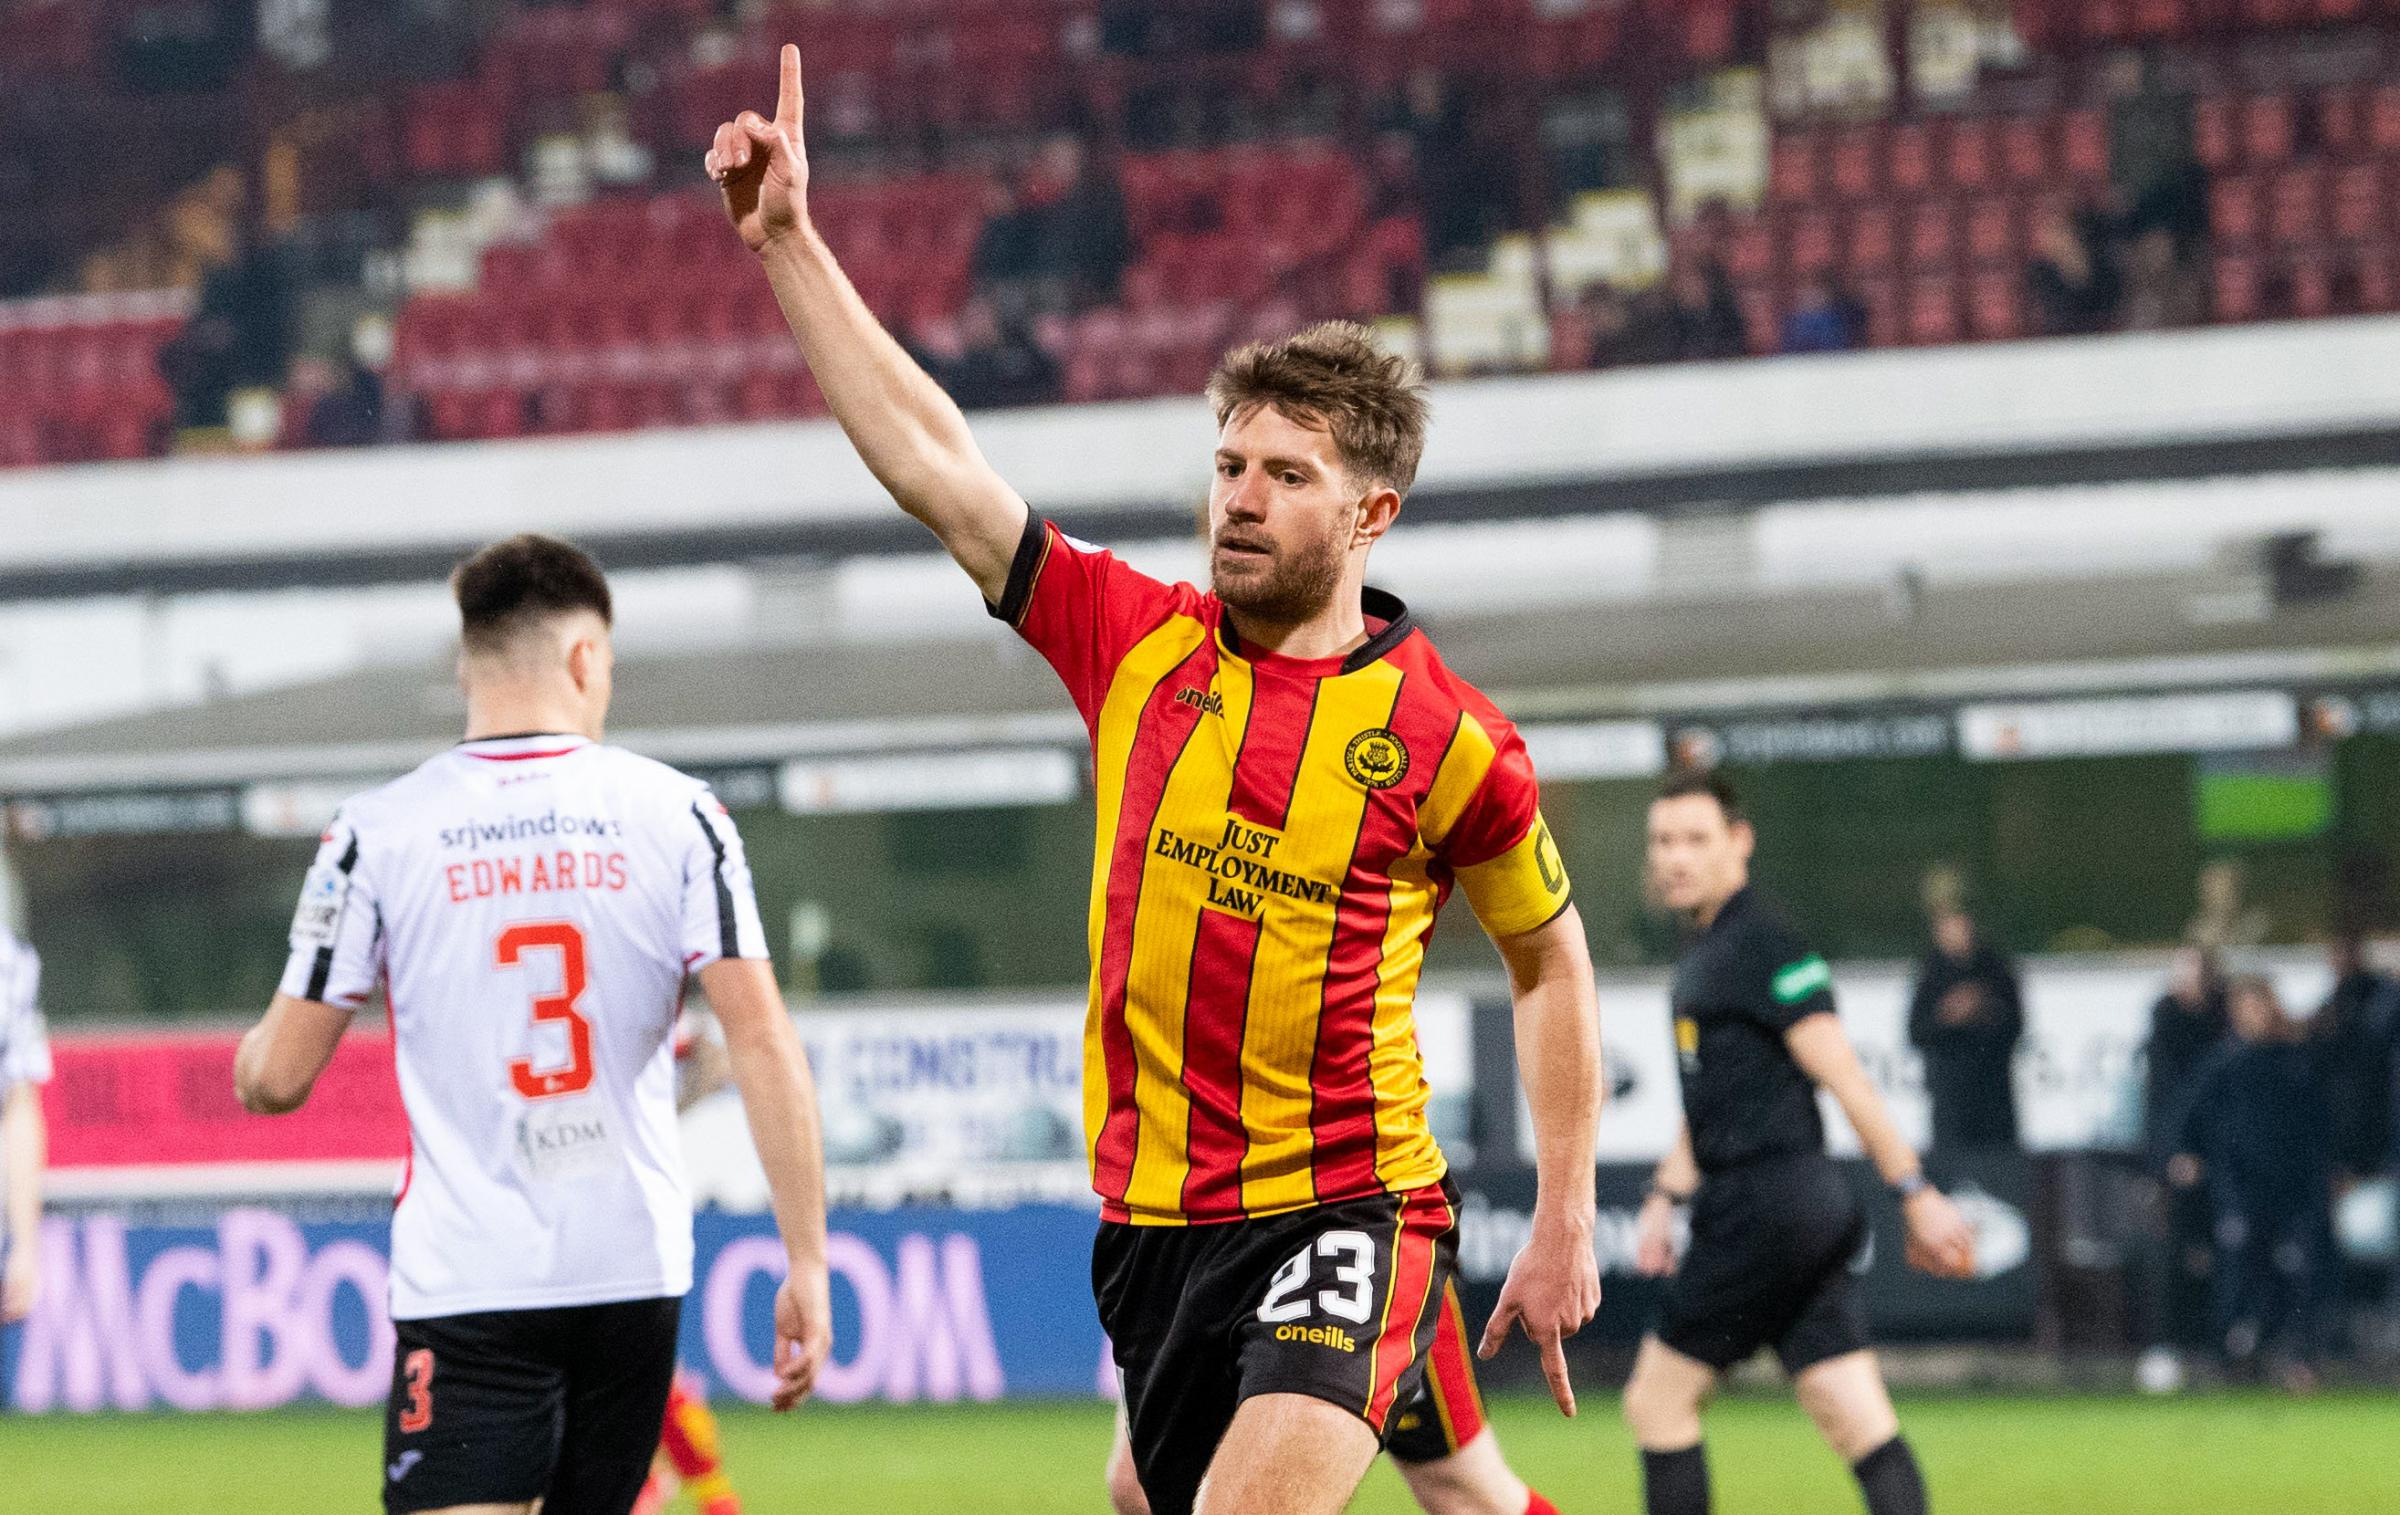 Ross Docherty pleased as Thistle all but confirm play-off spot with win over Dunfermline